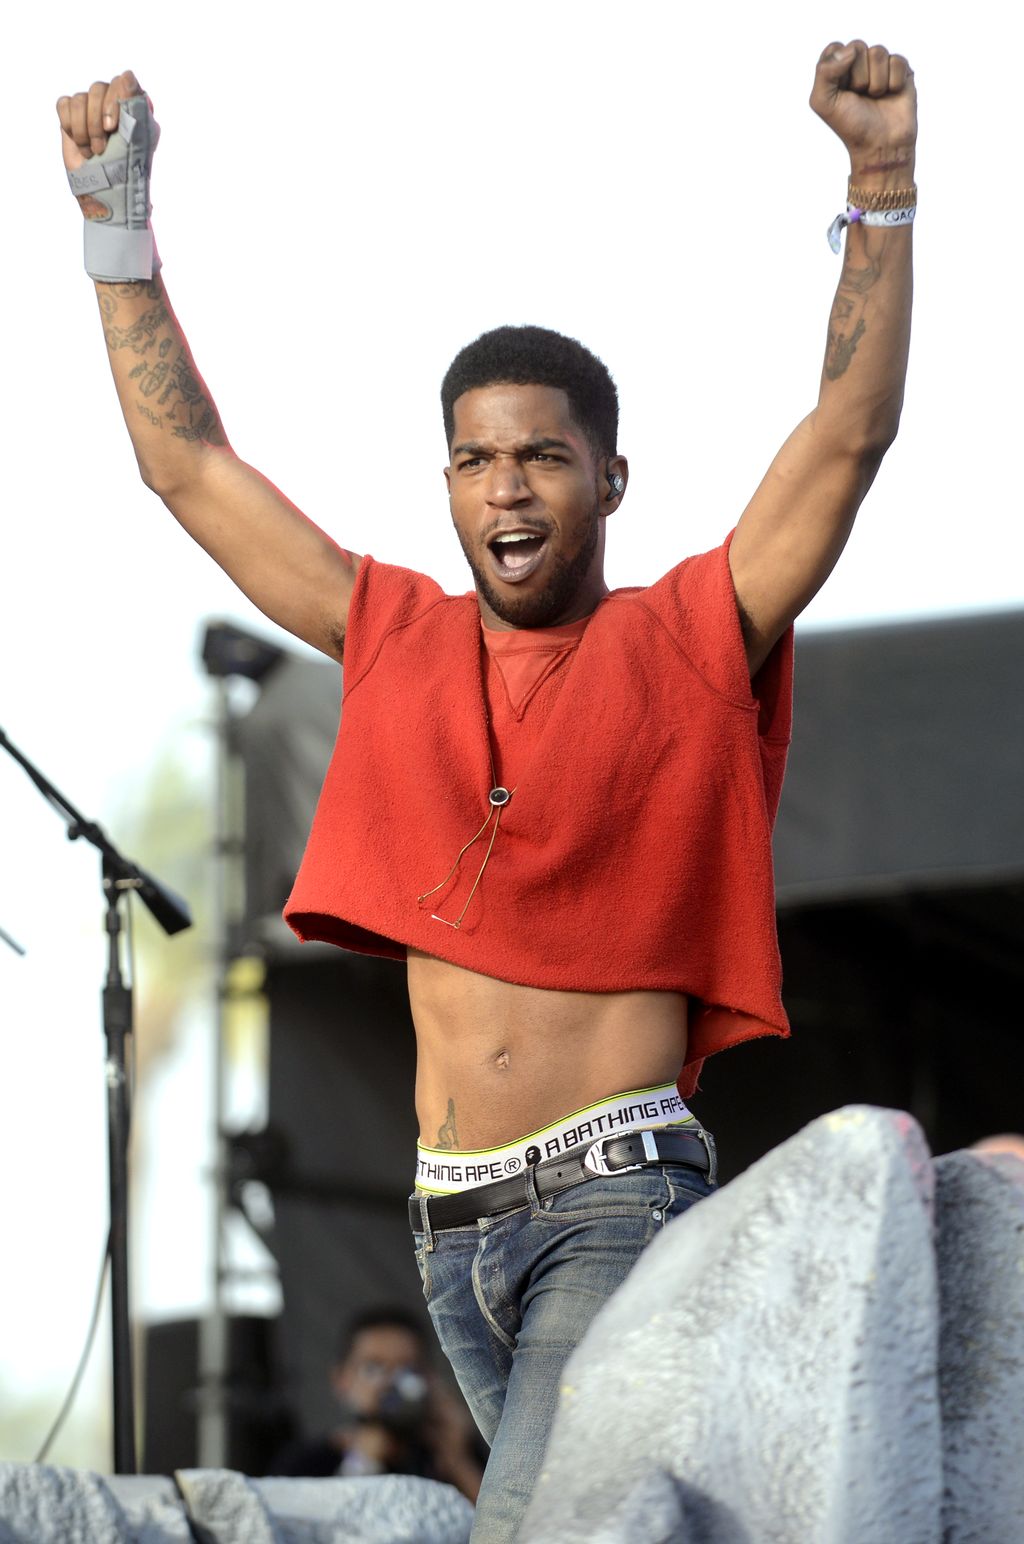 INDIO, CA - APRIL 12:  Kid Cudi performs as part of the Coachella Valley Music and Arts Festival at The Empire Polo Club on April 12, 2014 in Indio, California.  (Photo by Tim Mosenfelder/WireImage)